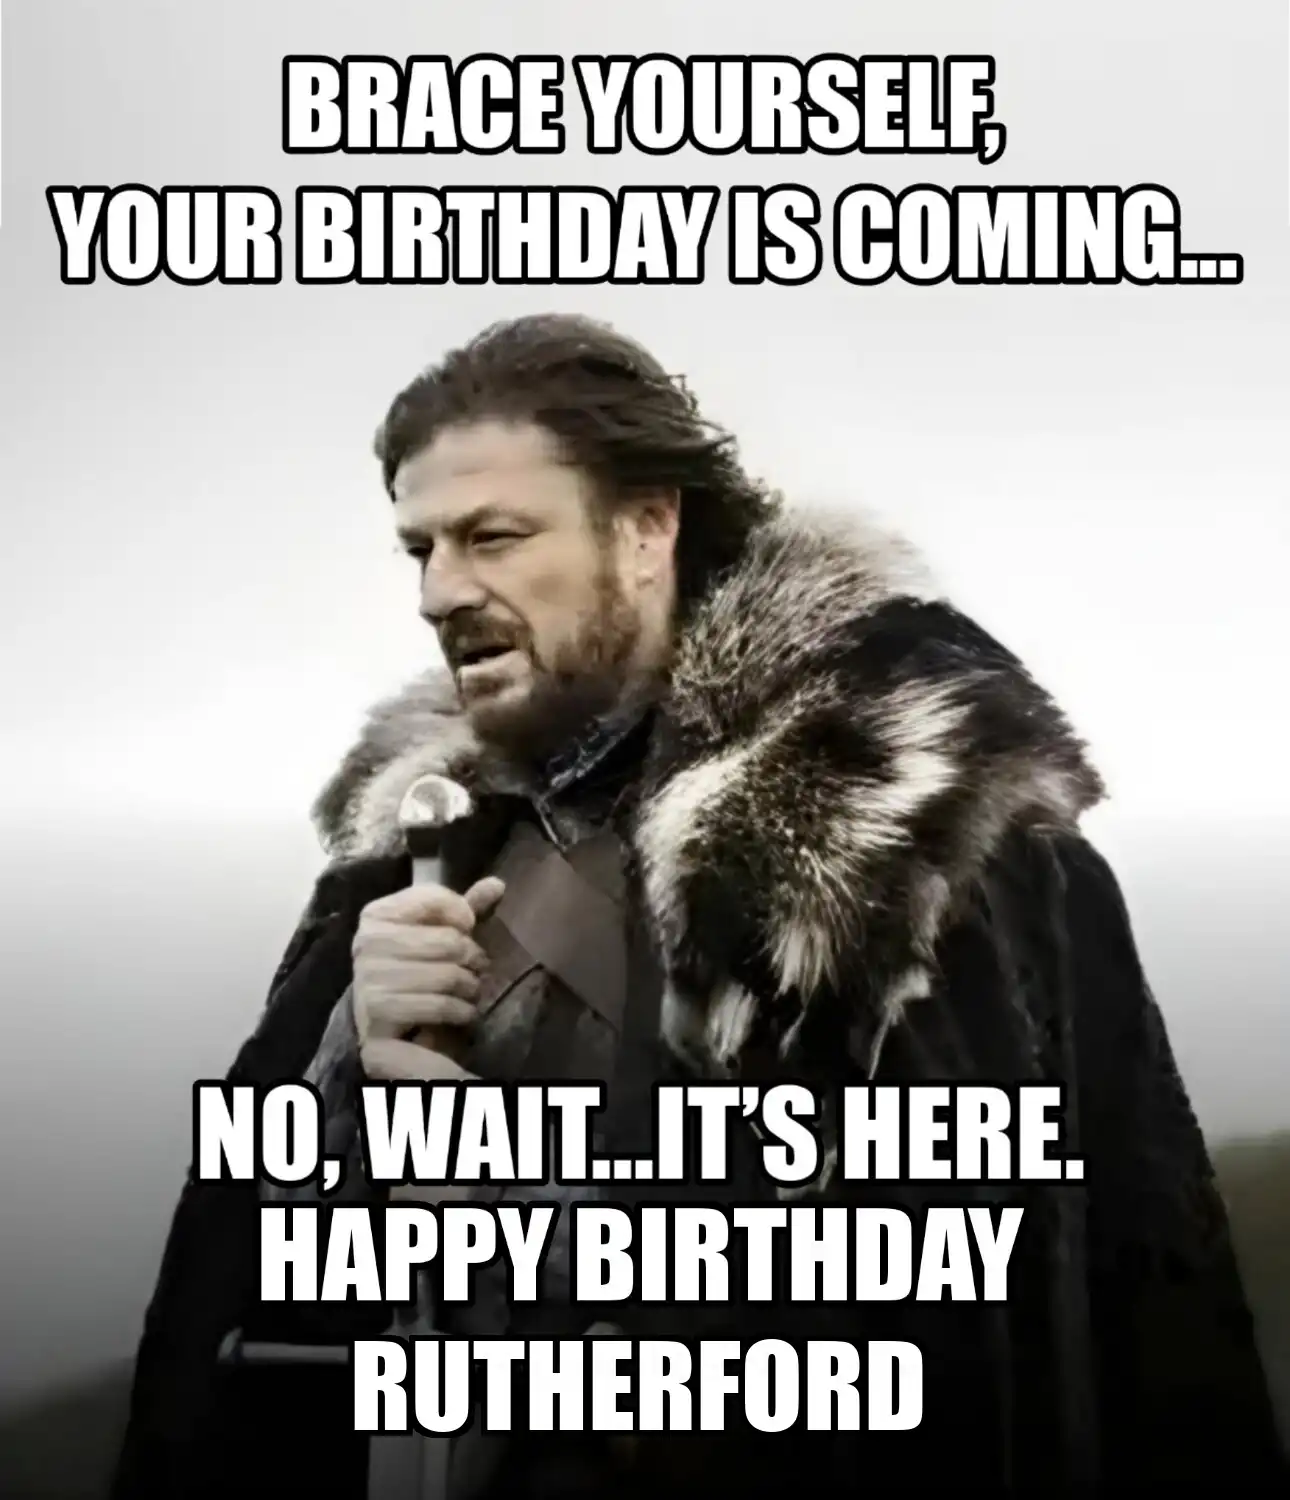 Happy Birthday Rutherford Brace Yourself Your Birthday Is Coming Meme